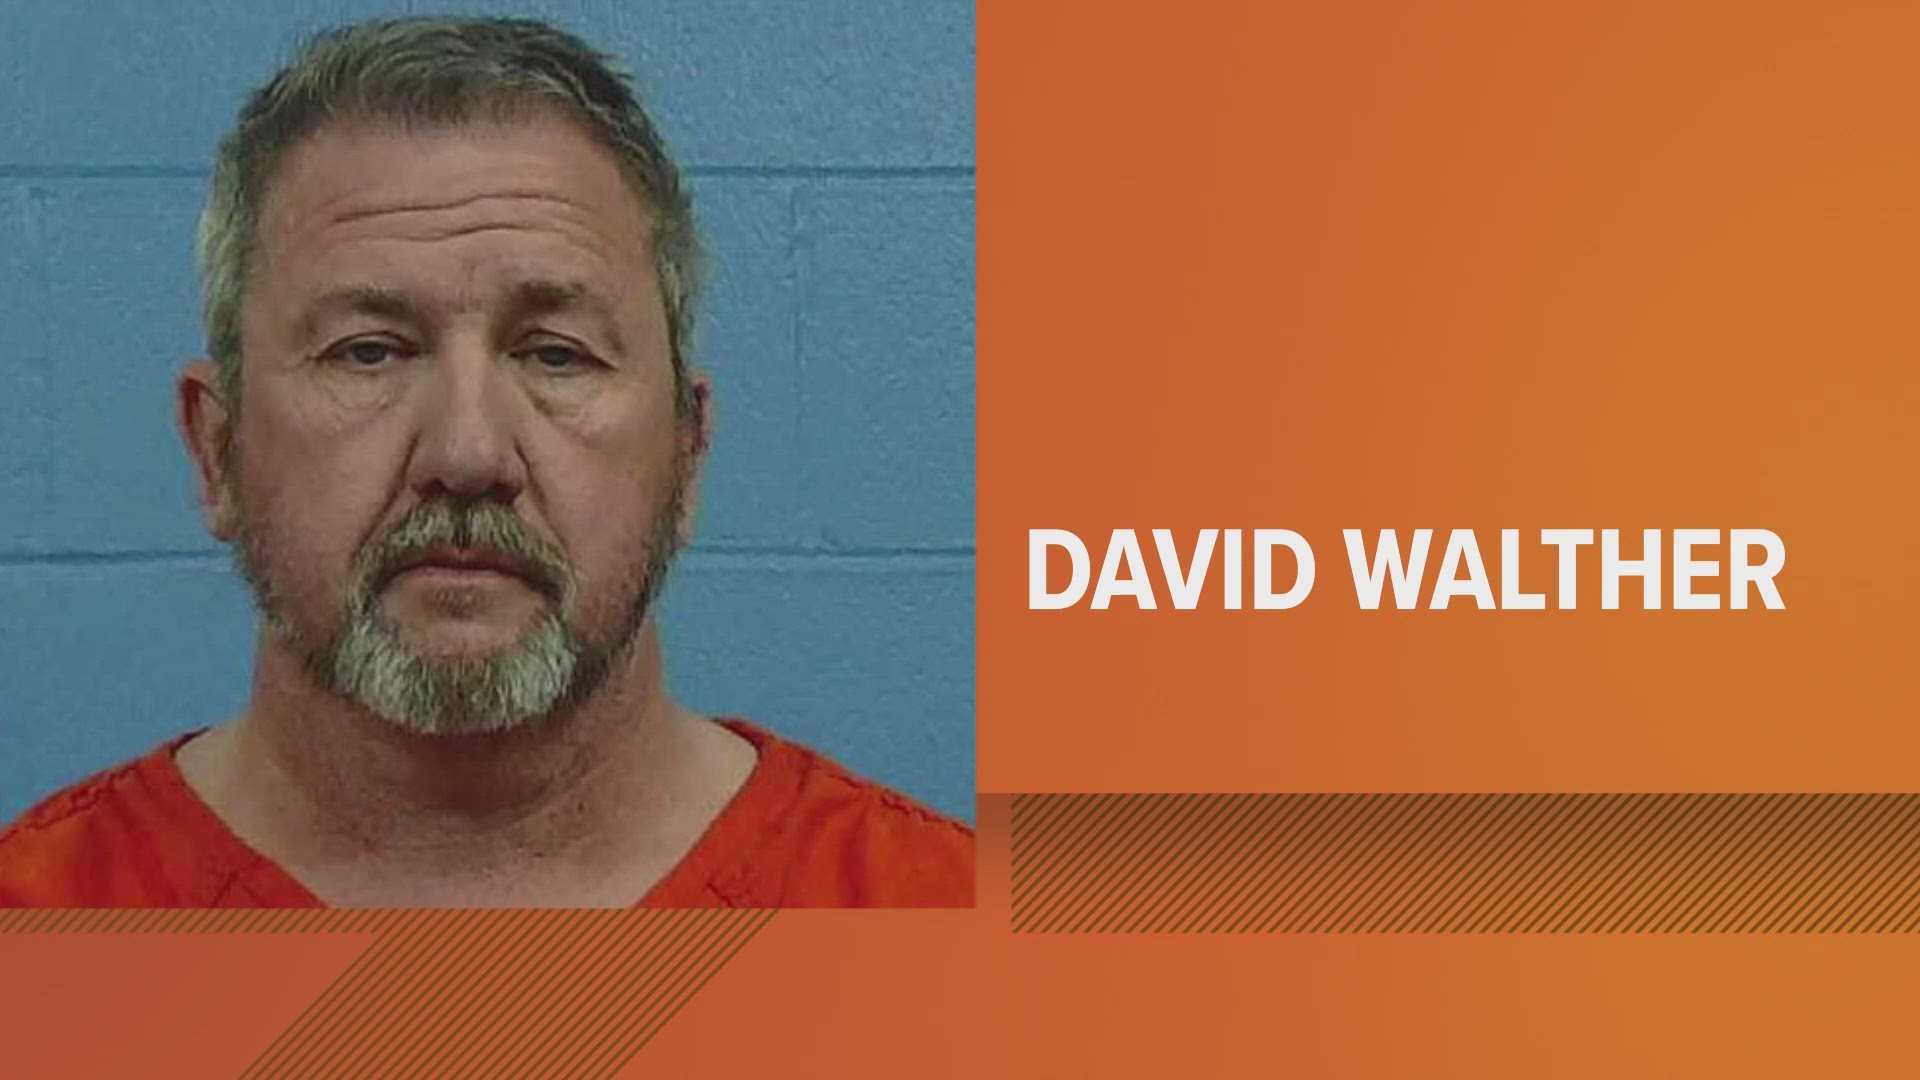 A former Round Rock pastor is going to prison for possession of child pornography.